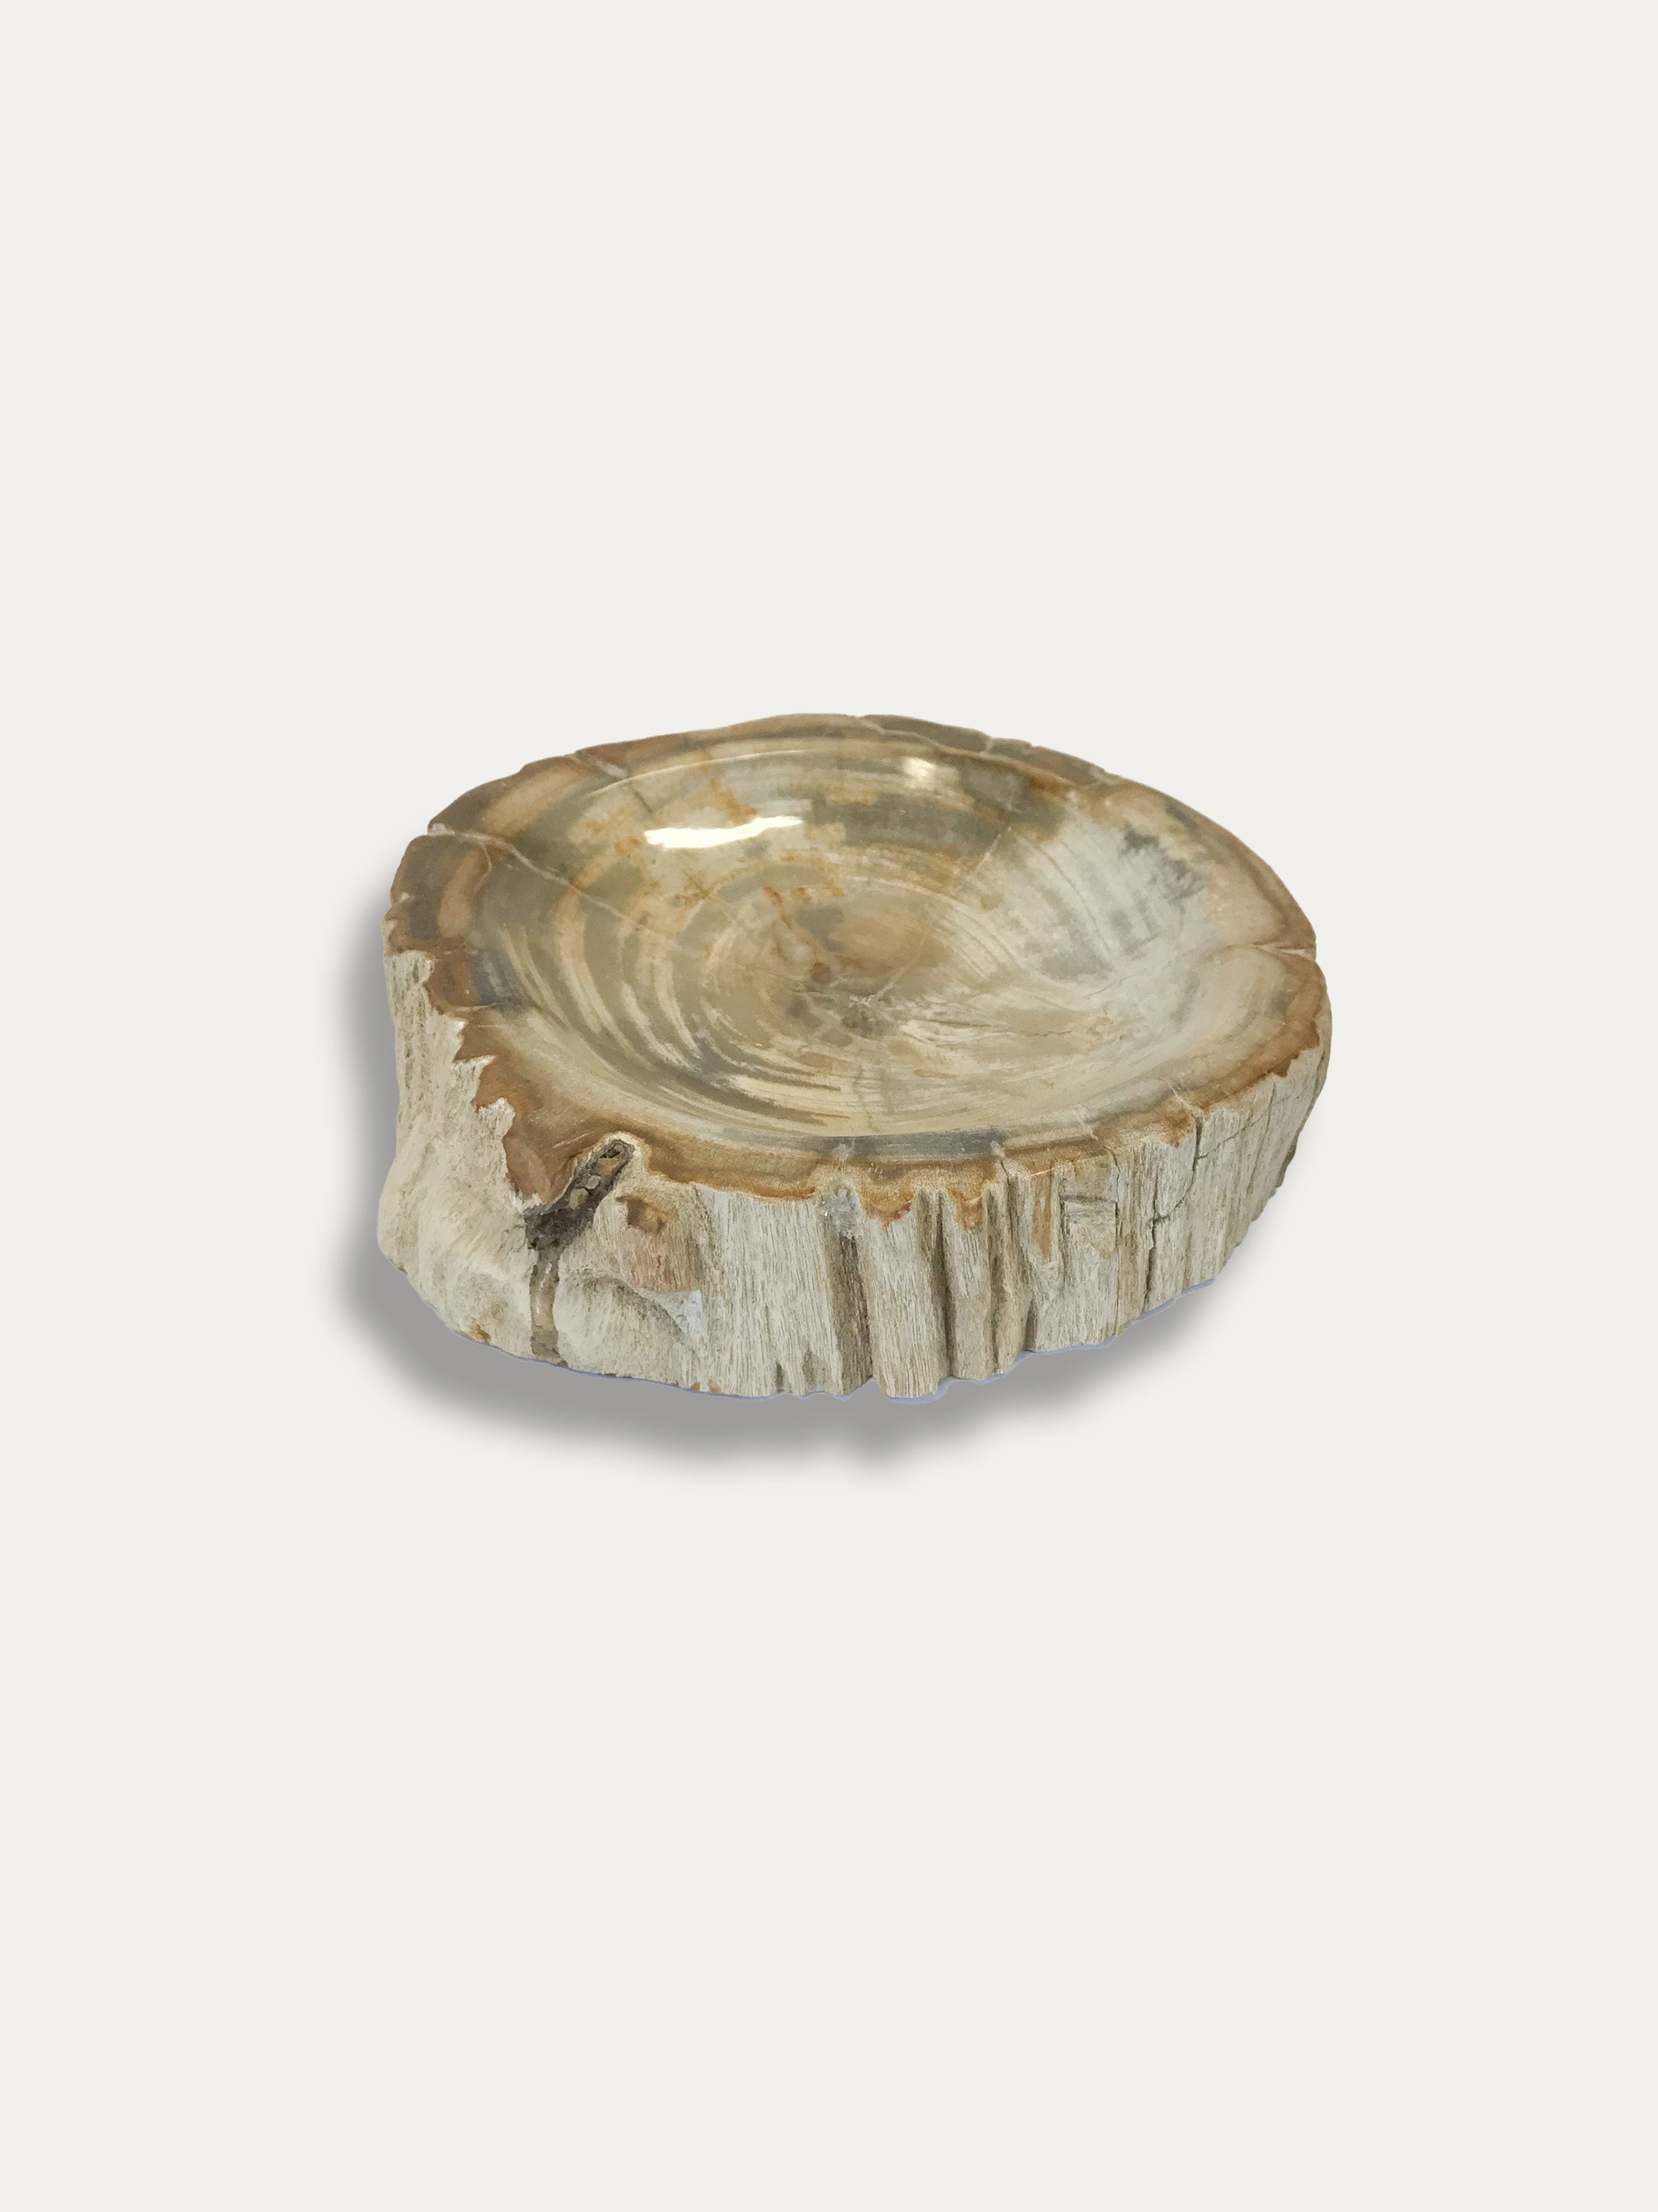 Petrified Wood Bowl  - Enjoy Italy's largest collection of Petrified wood accessories!